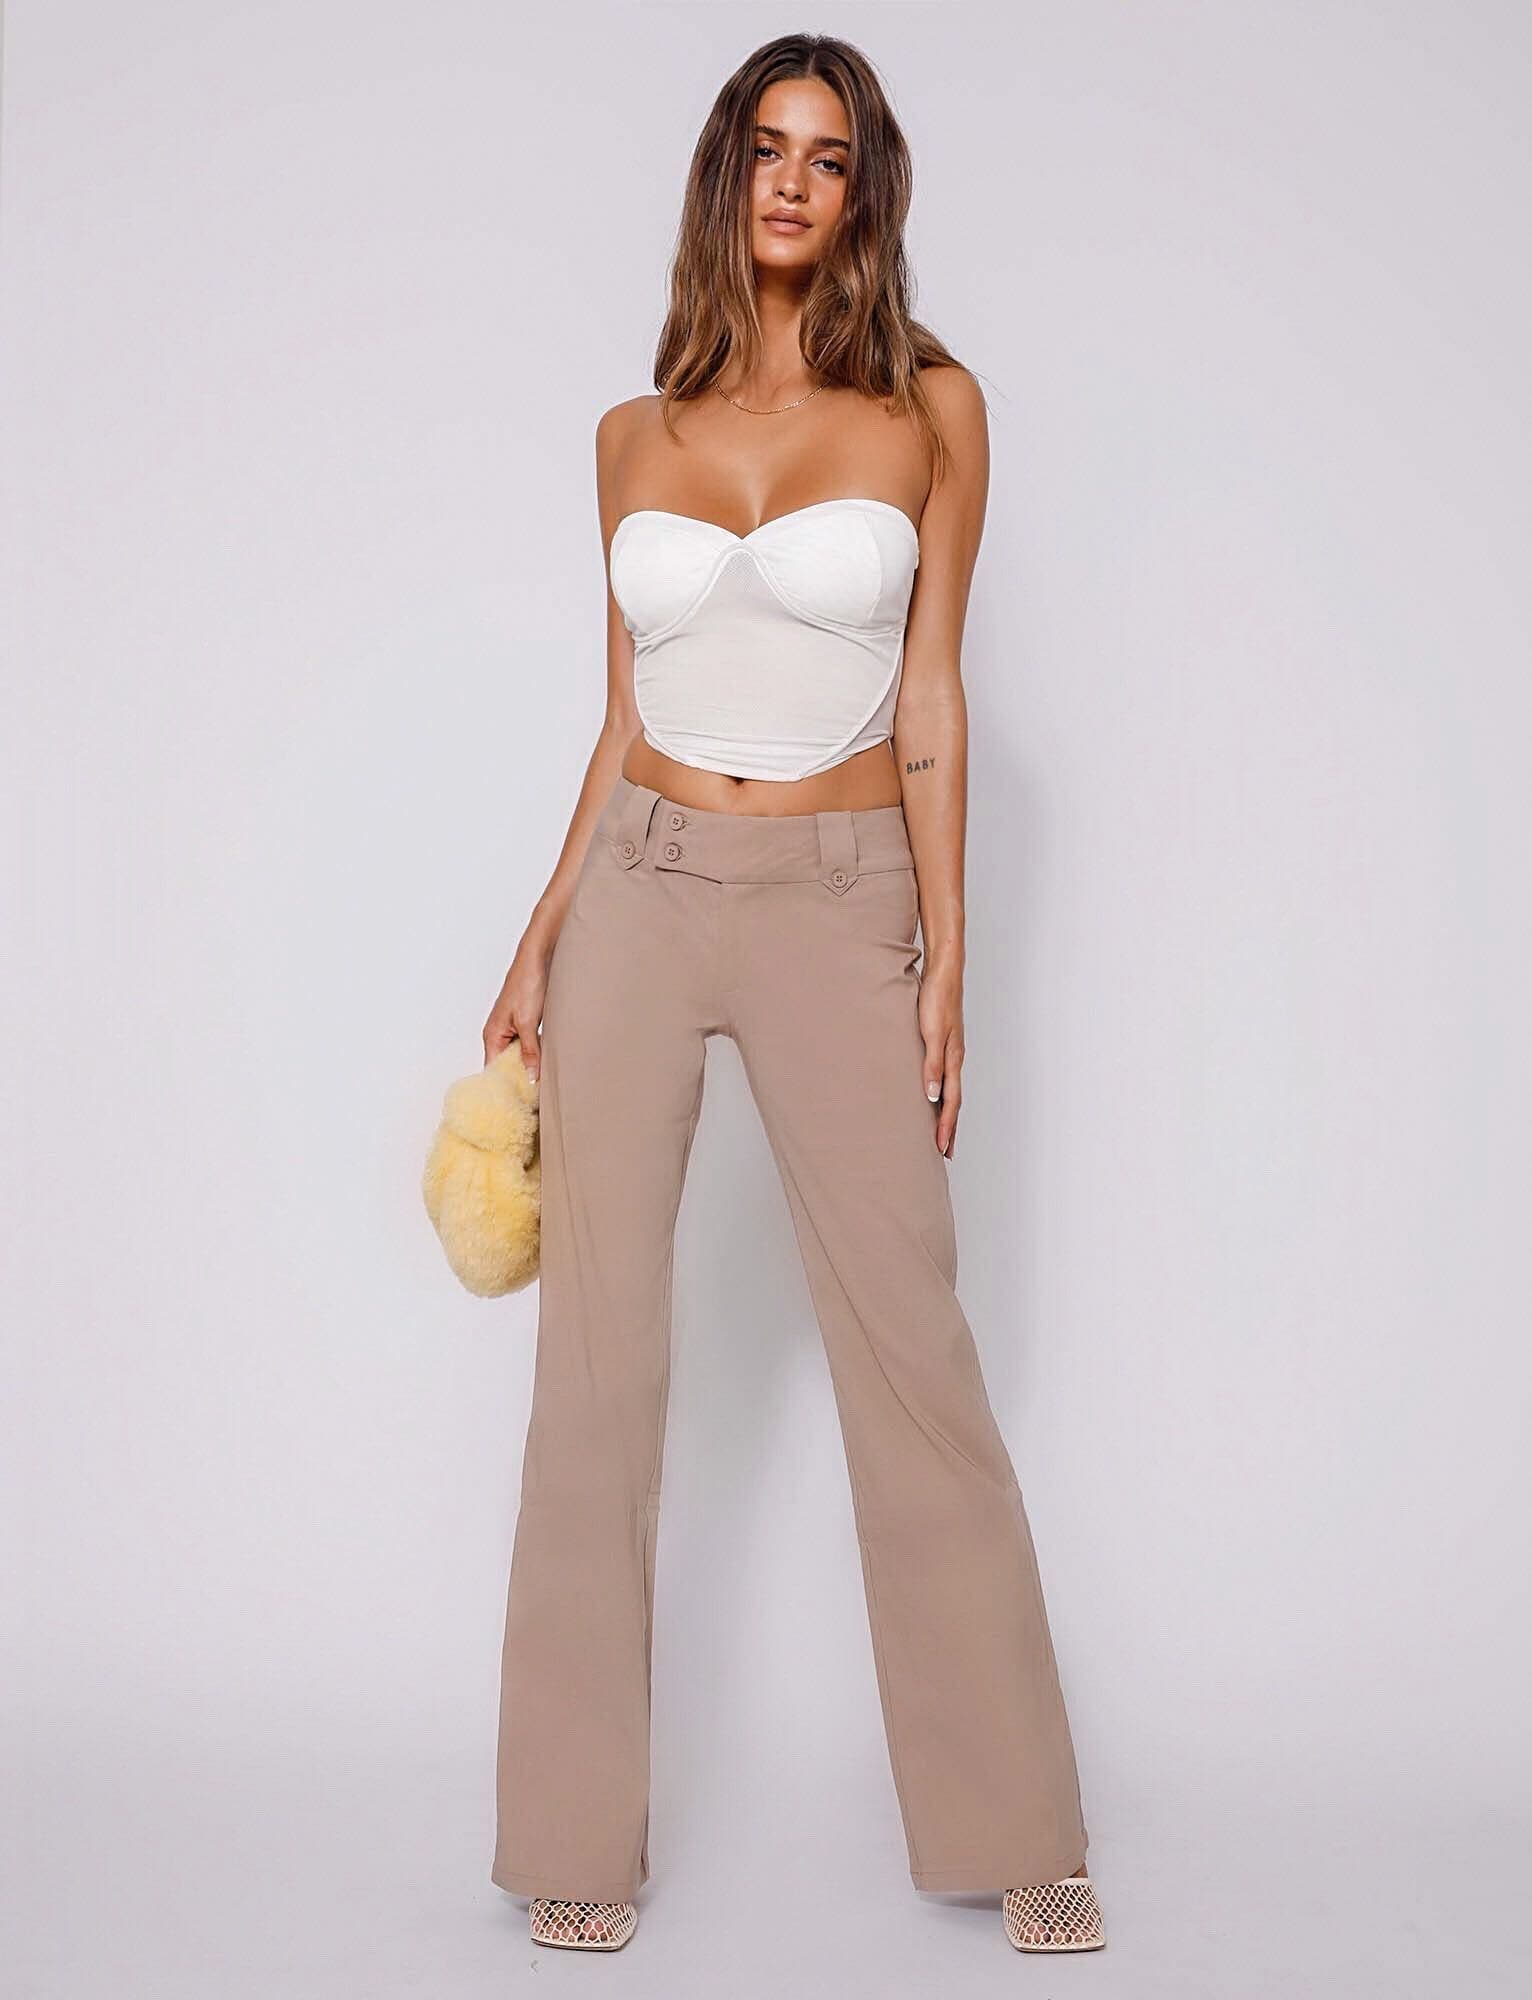 Tiger Mist - Our MUST have Harriet tube top + Kittie pant as seen